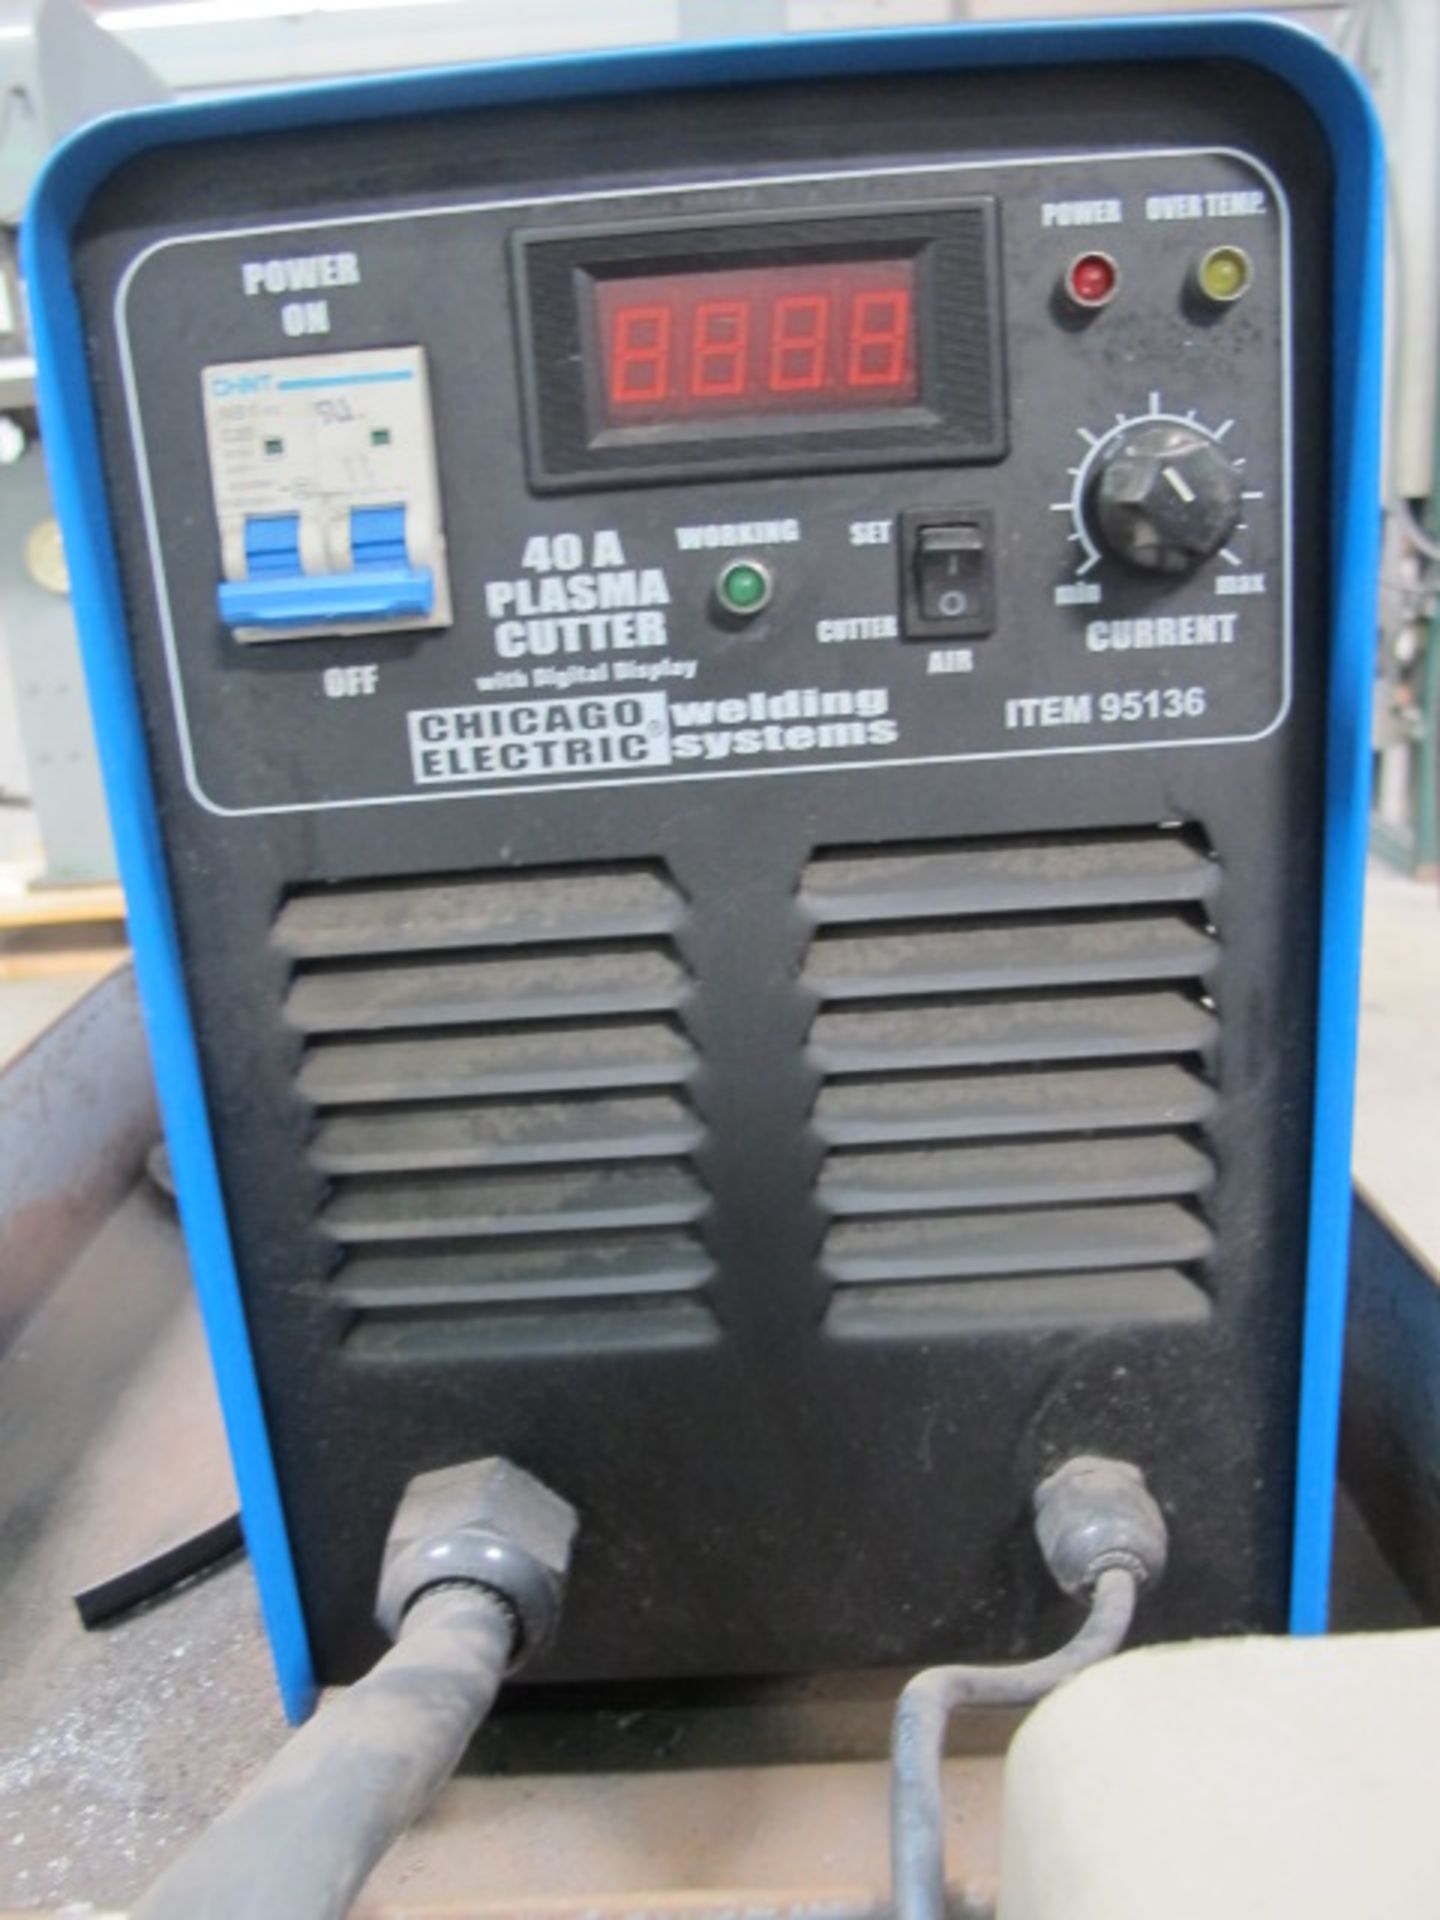 Chicago Electric mdl. 95136 40A Plasma Cutting Power Source - Image 3 of 3